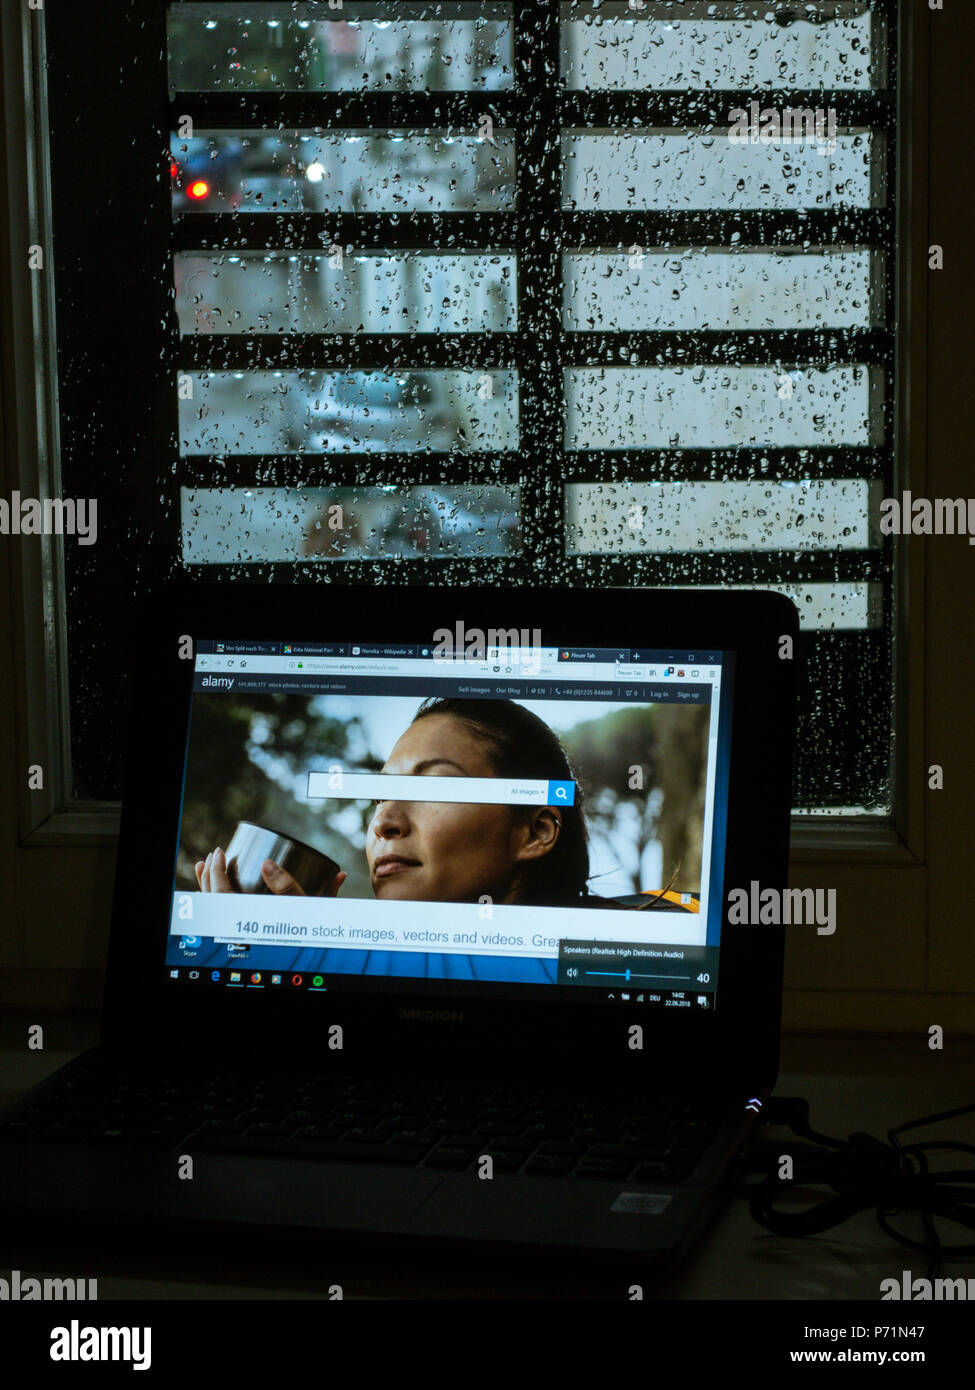 Computer screen in front of a window stained by raindrops Stock Photo